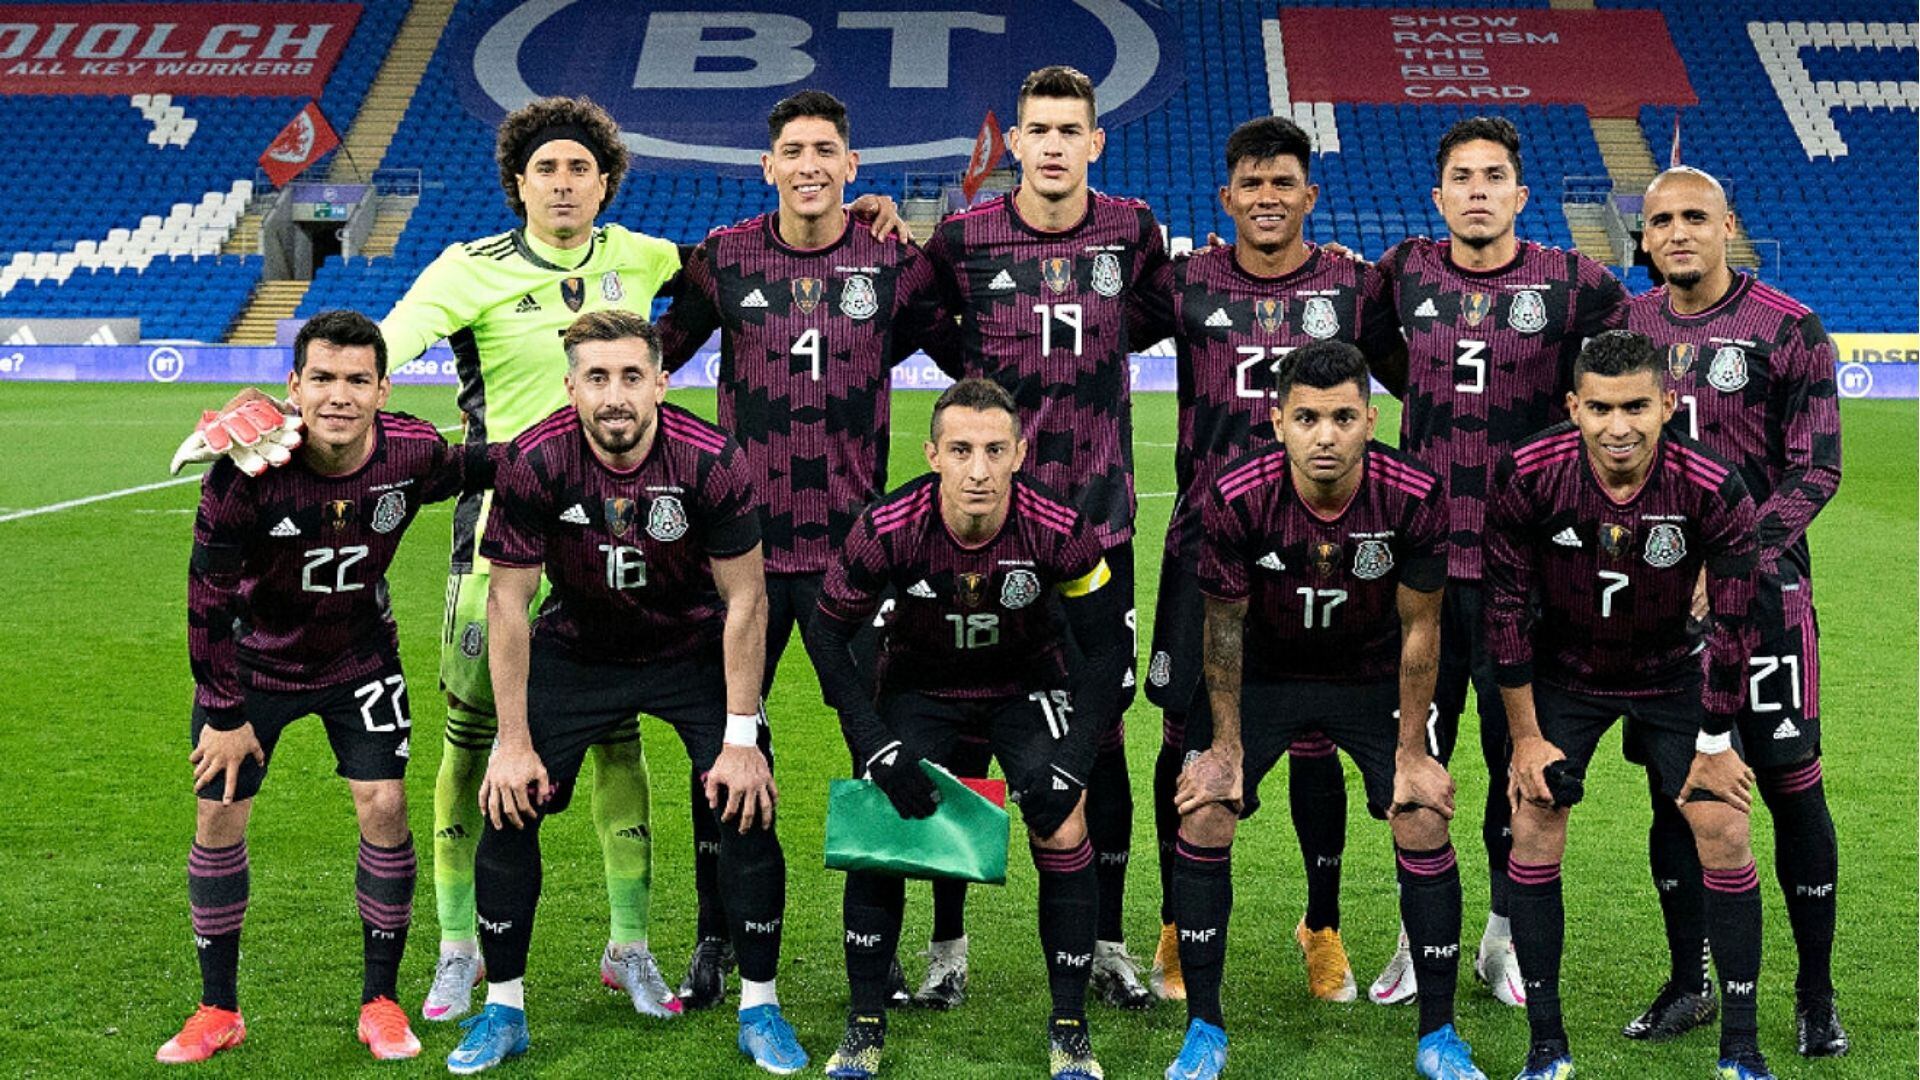 FMF prohibited Gerardo Martino to call these players to Mexico National Team